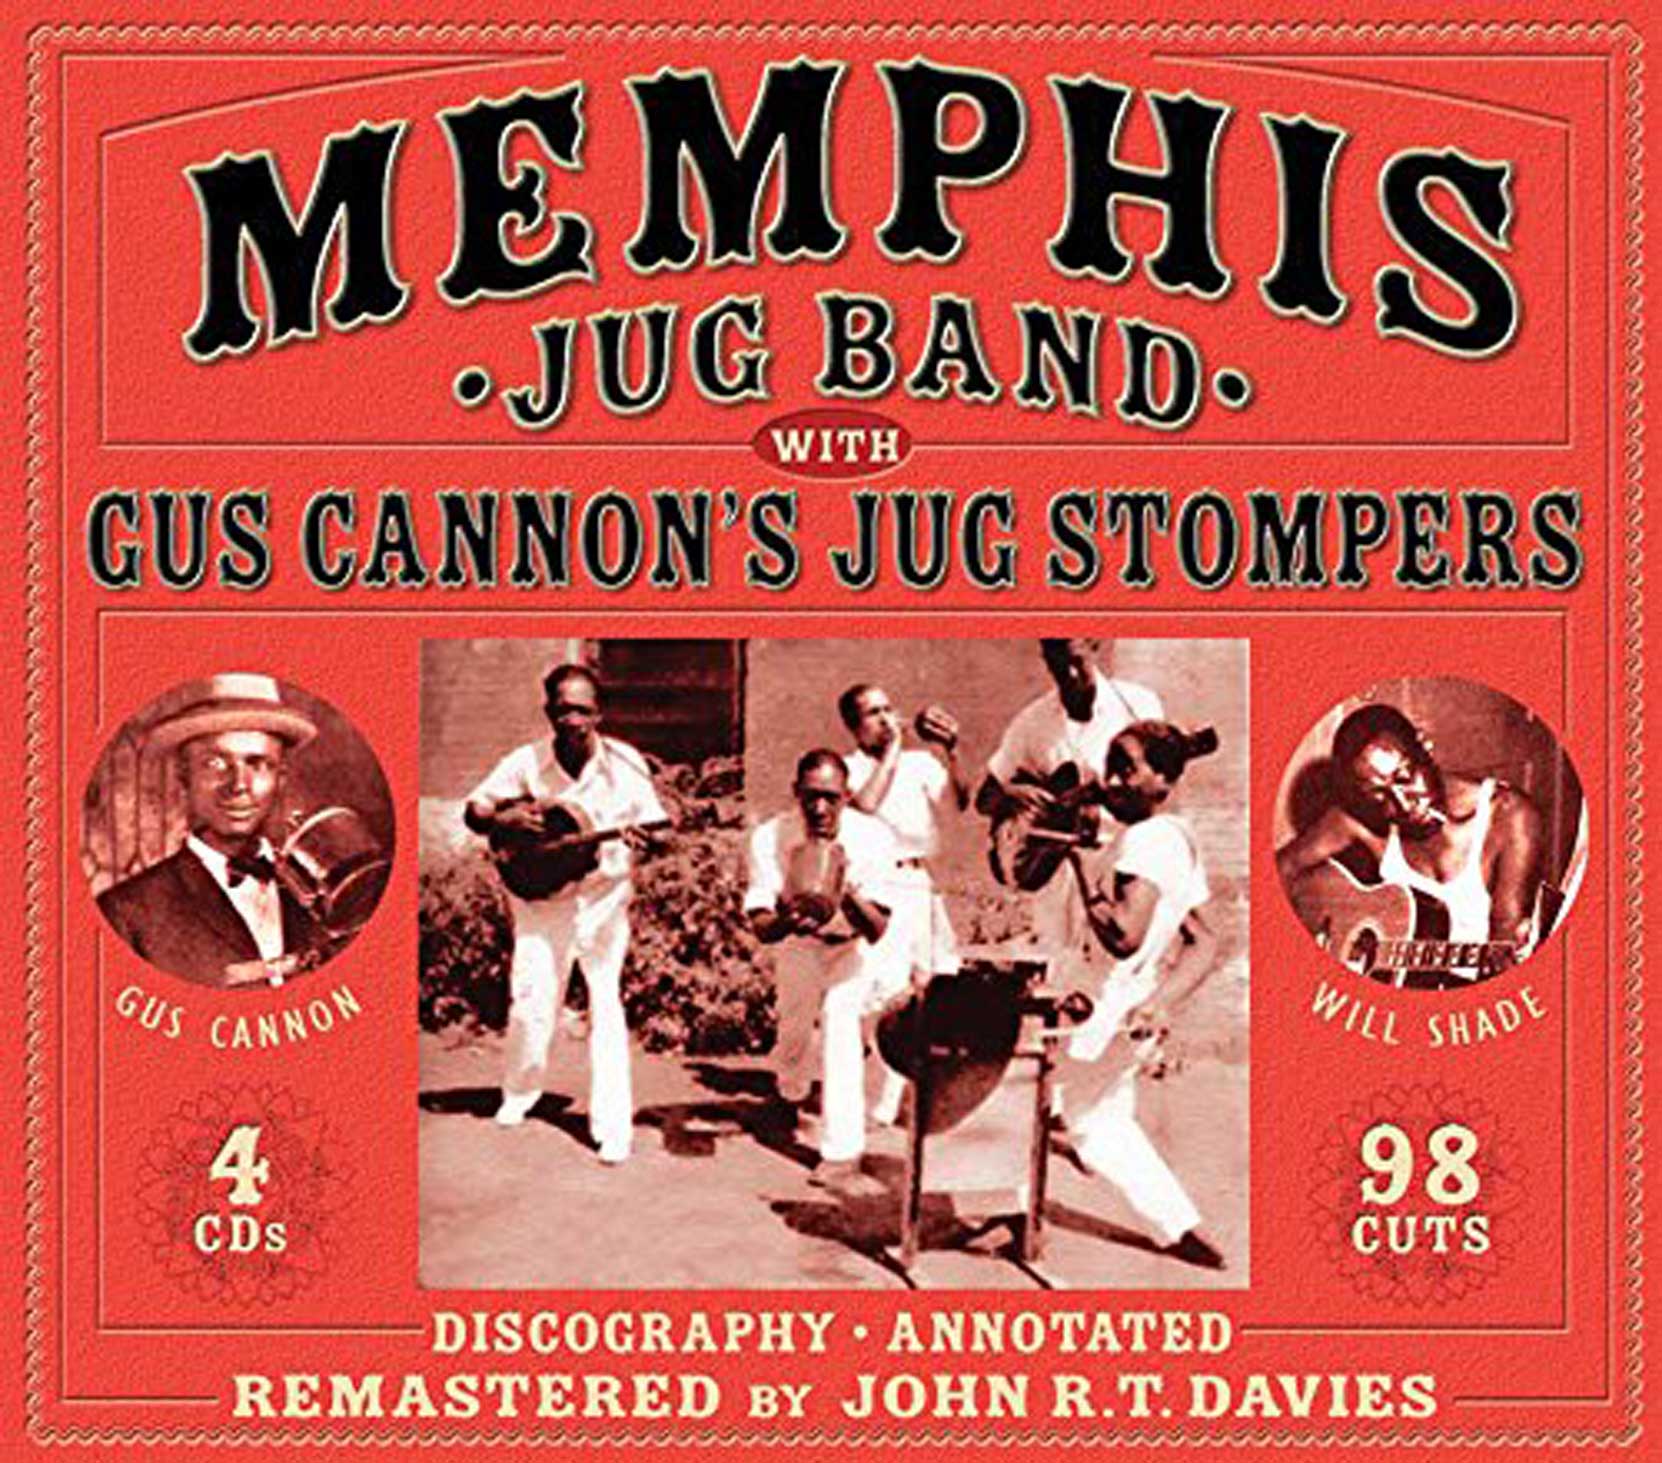 Memphis Jug Band & Gus Cannon's Jug Stompers, a 4CD, 98 track box set, released by JSP Records, CD cover